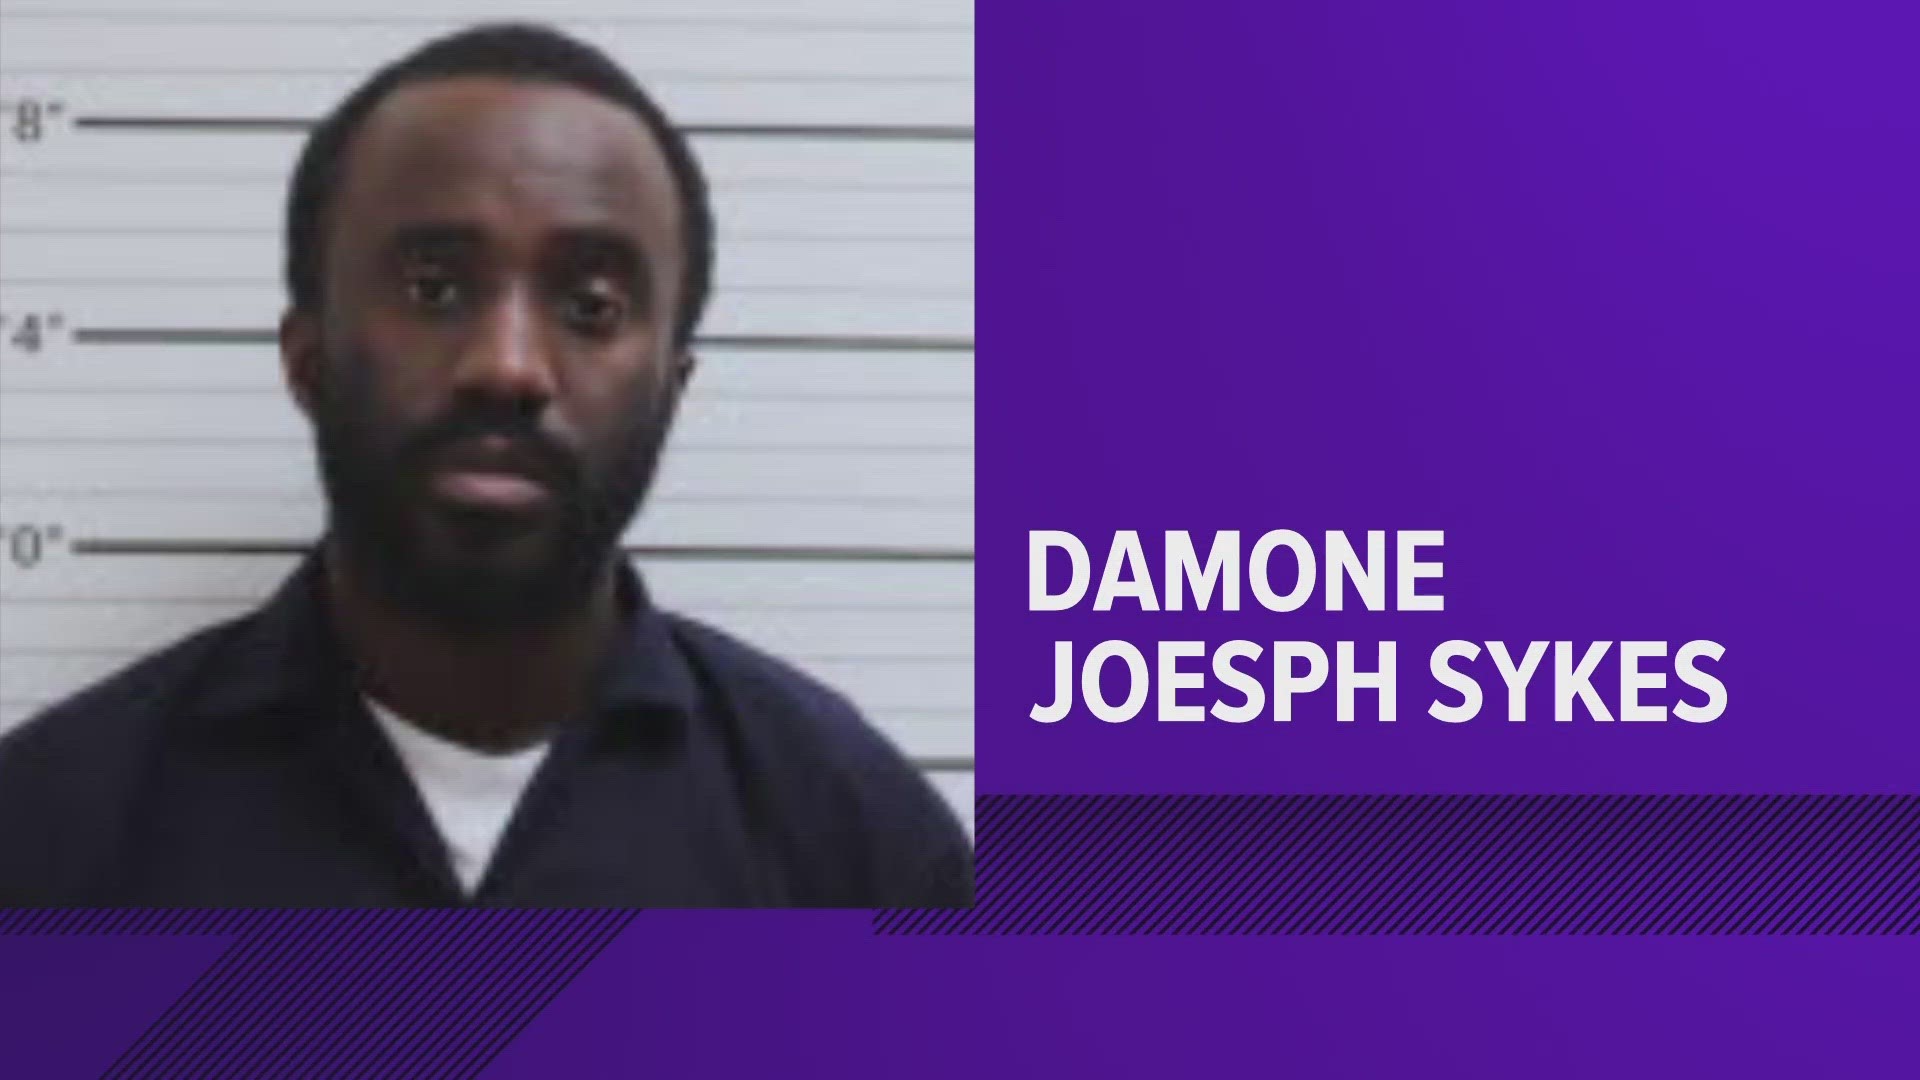 Damone Joseph Sykes was arrested Friday, March 31, and is charged with first-degree murder, attempted first-degree murder, and more.